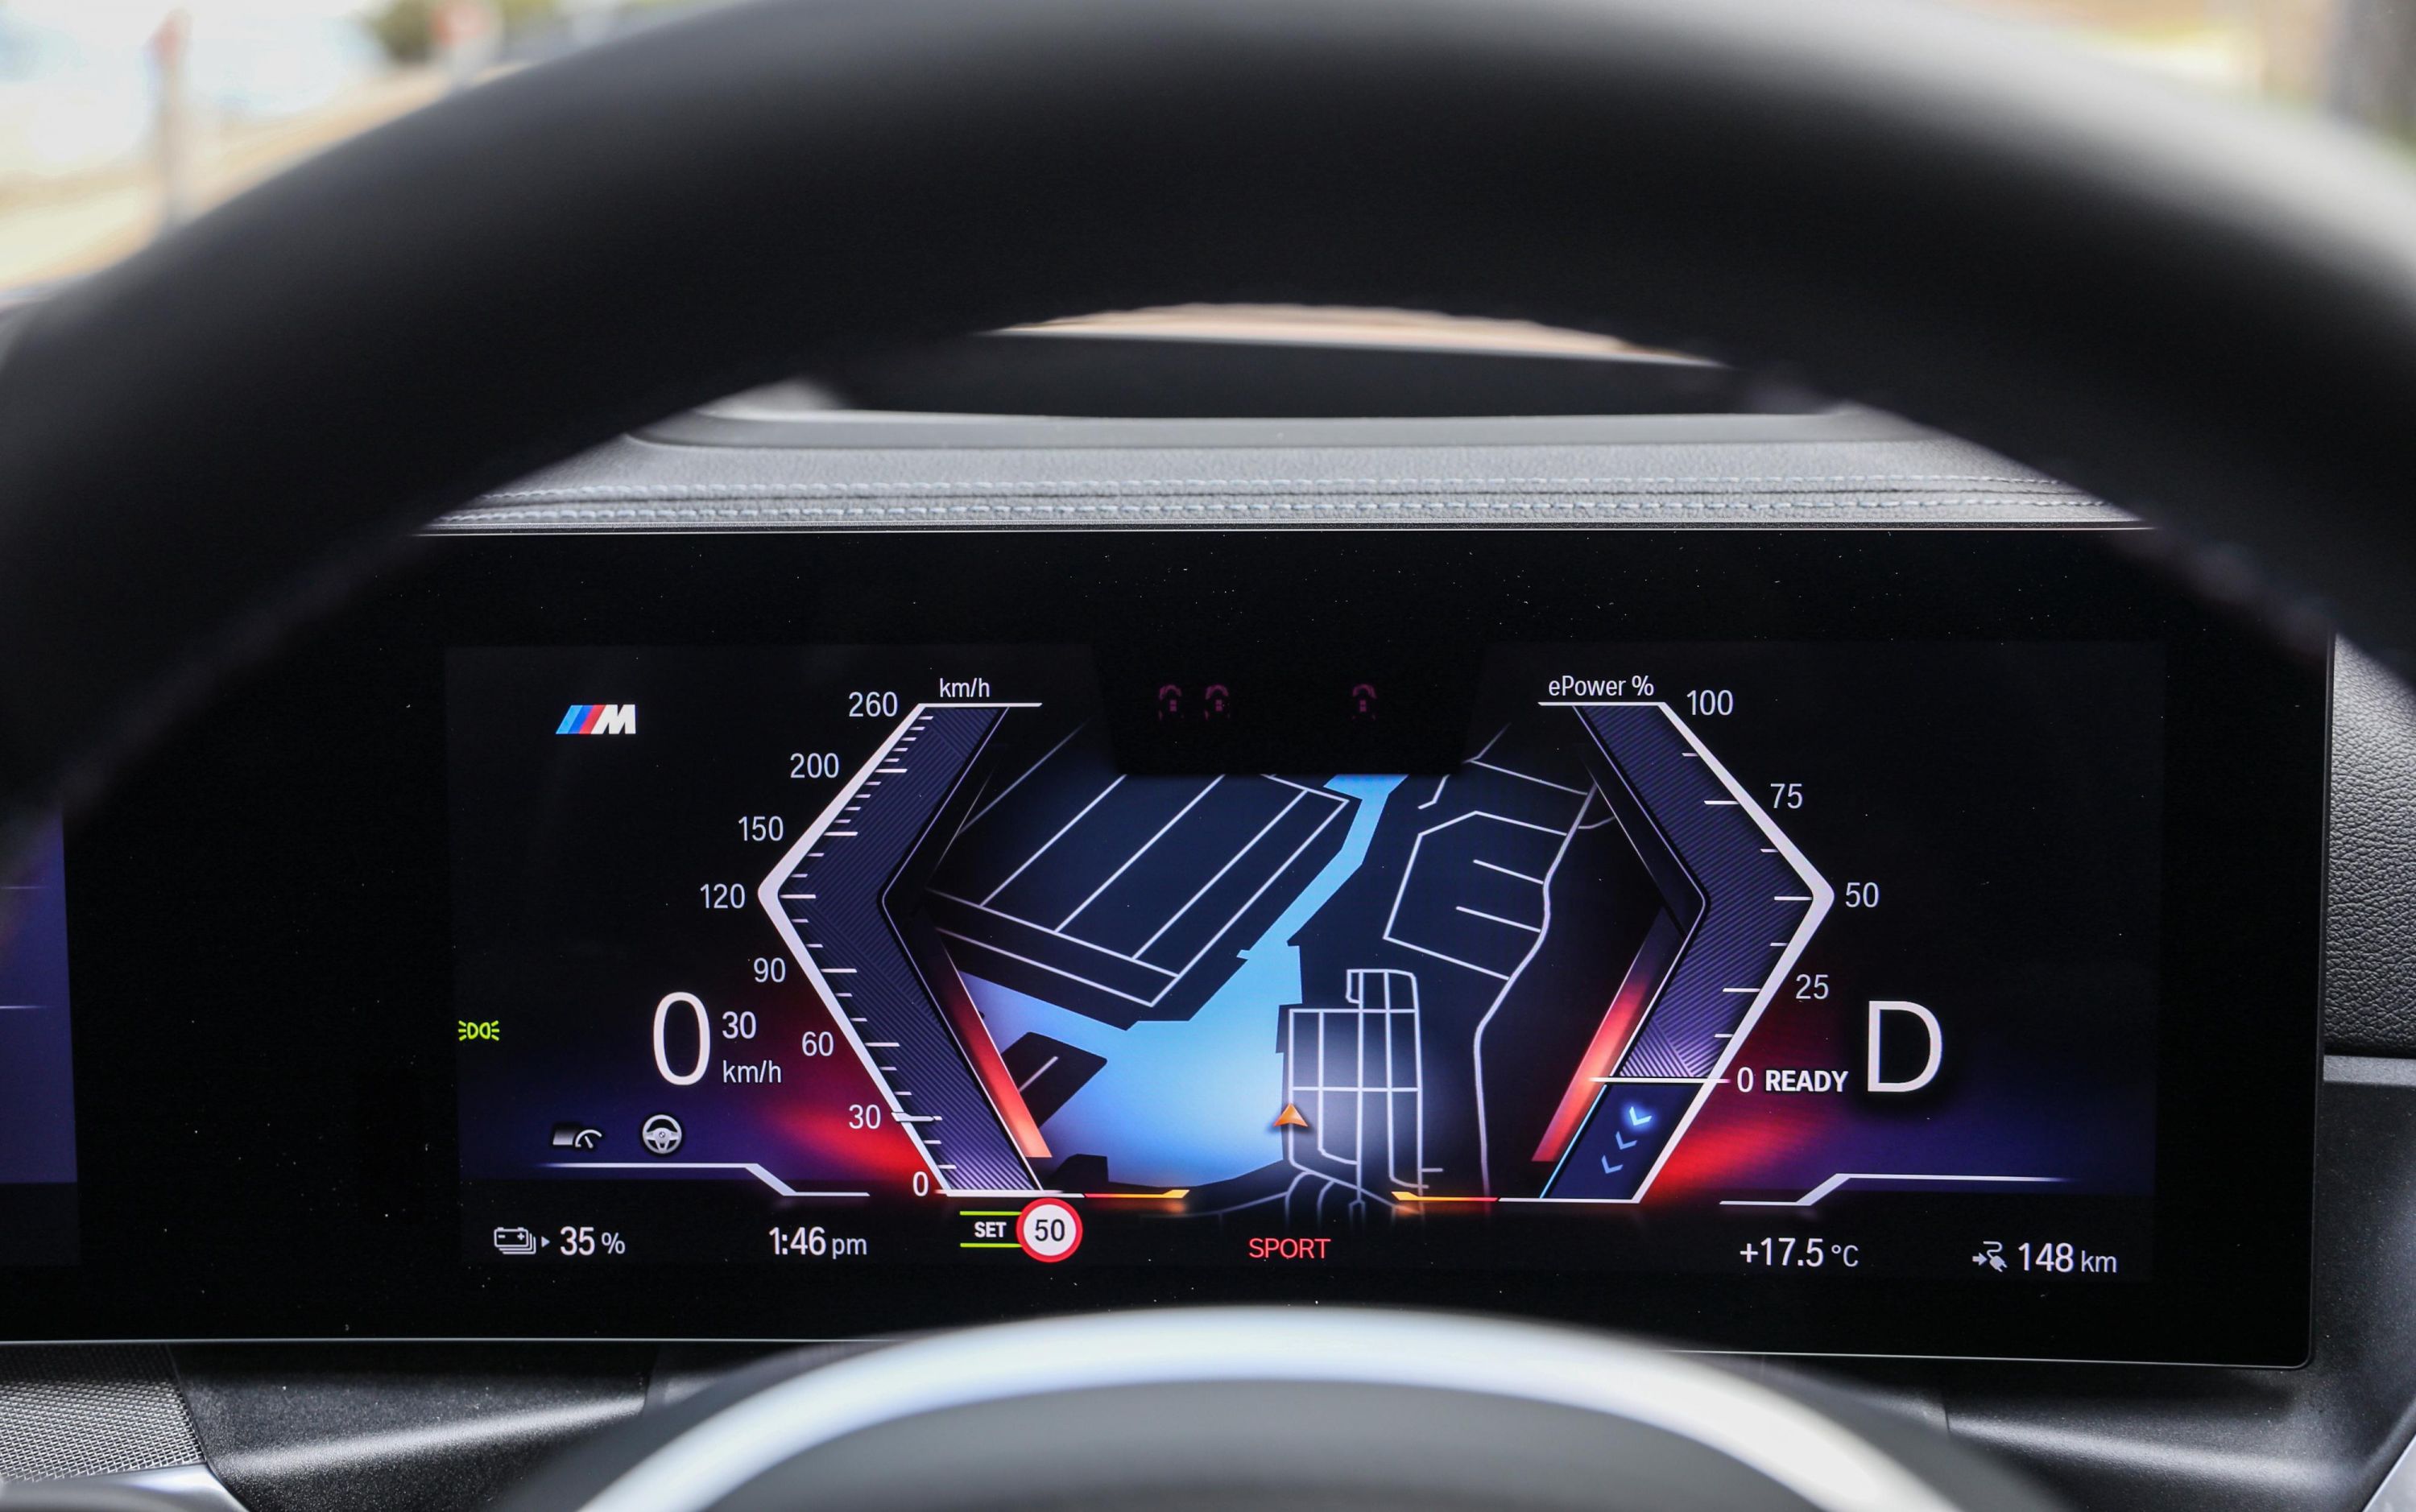 BMW goes all in on Apple CarPlay in i4 M50 marketing